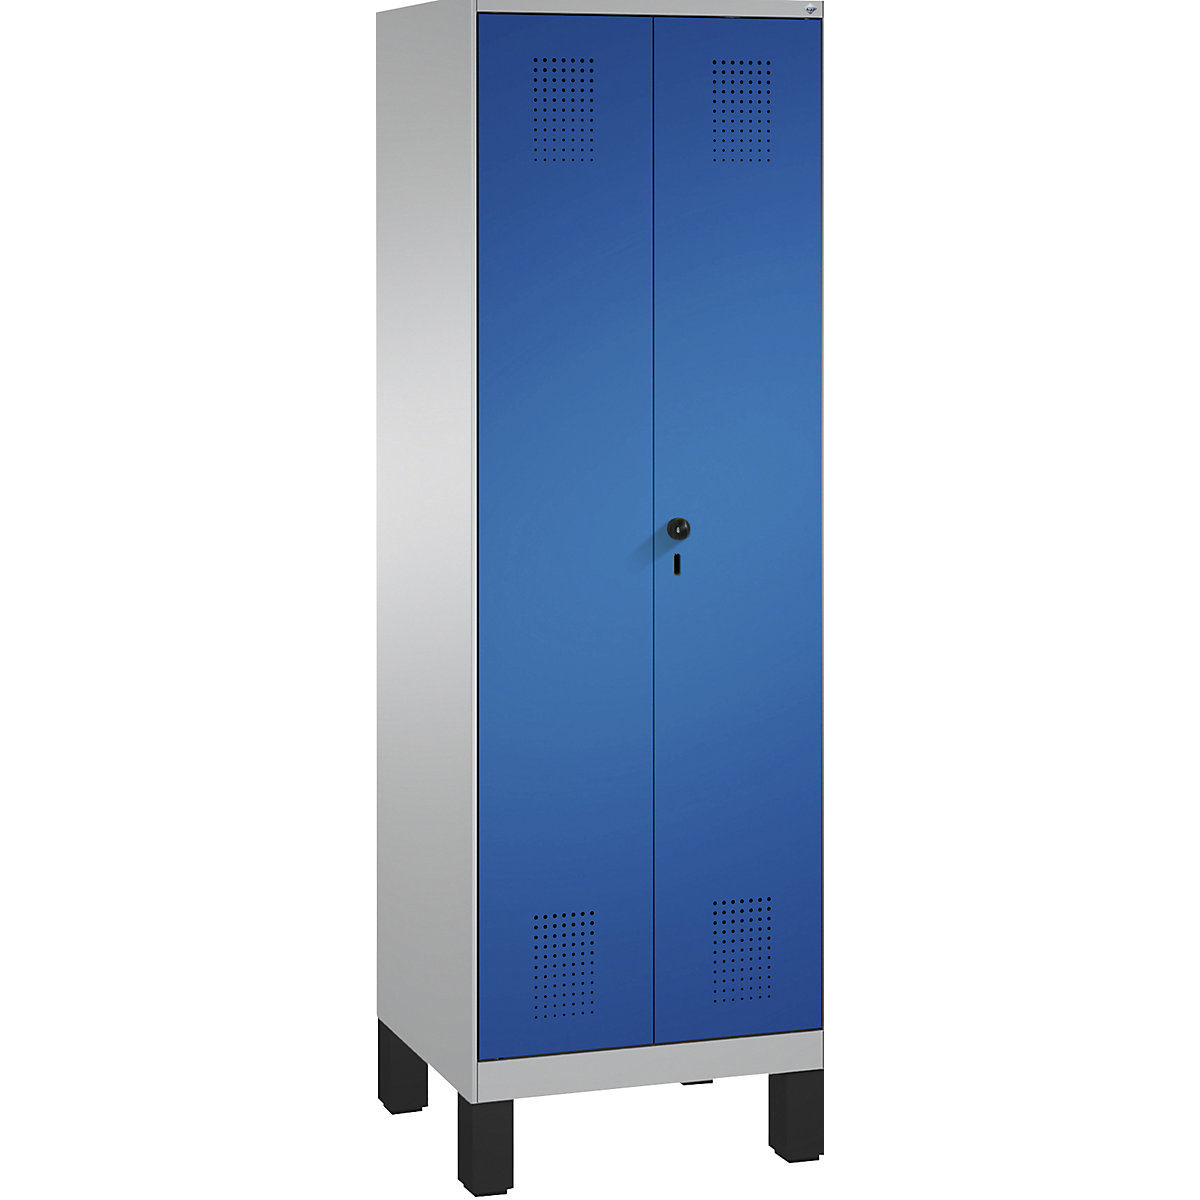 EVOLO storage cupboard, doors close in the middle, with feet – C+P, 2 compartments, 8 shelves, compartment width 300 mm, white aluminium / gentian blue